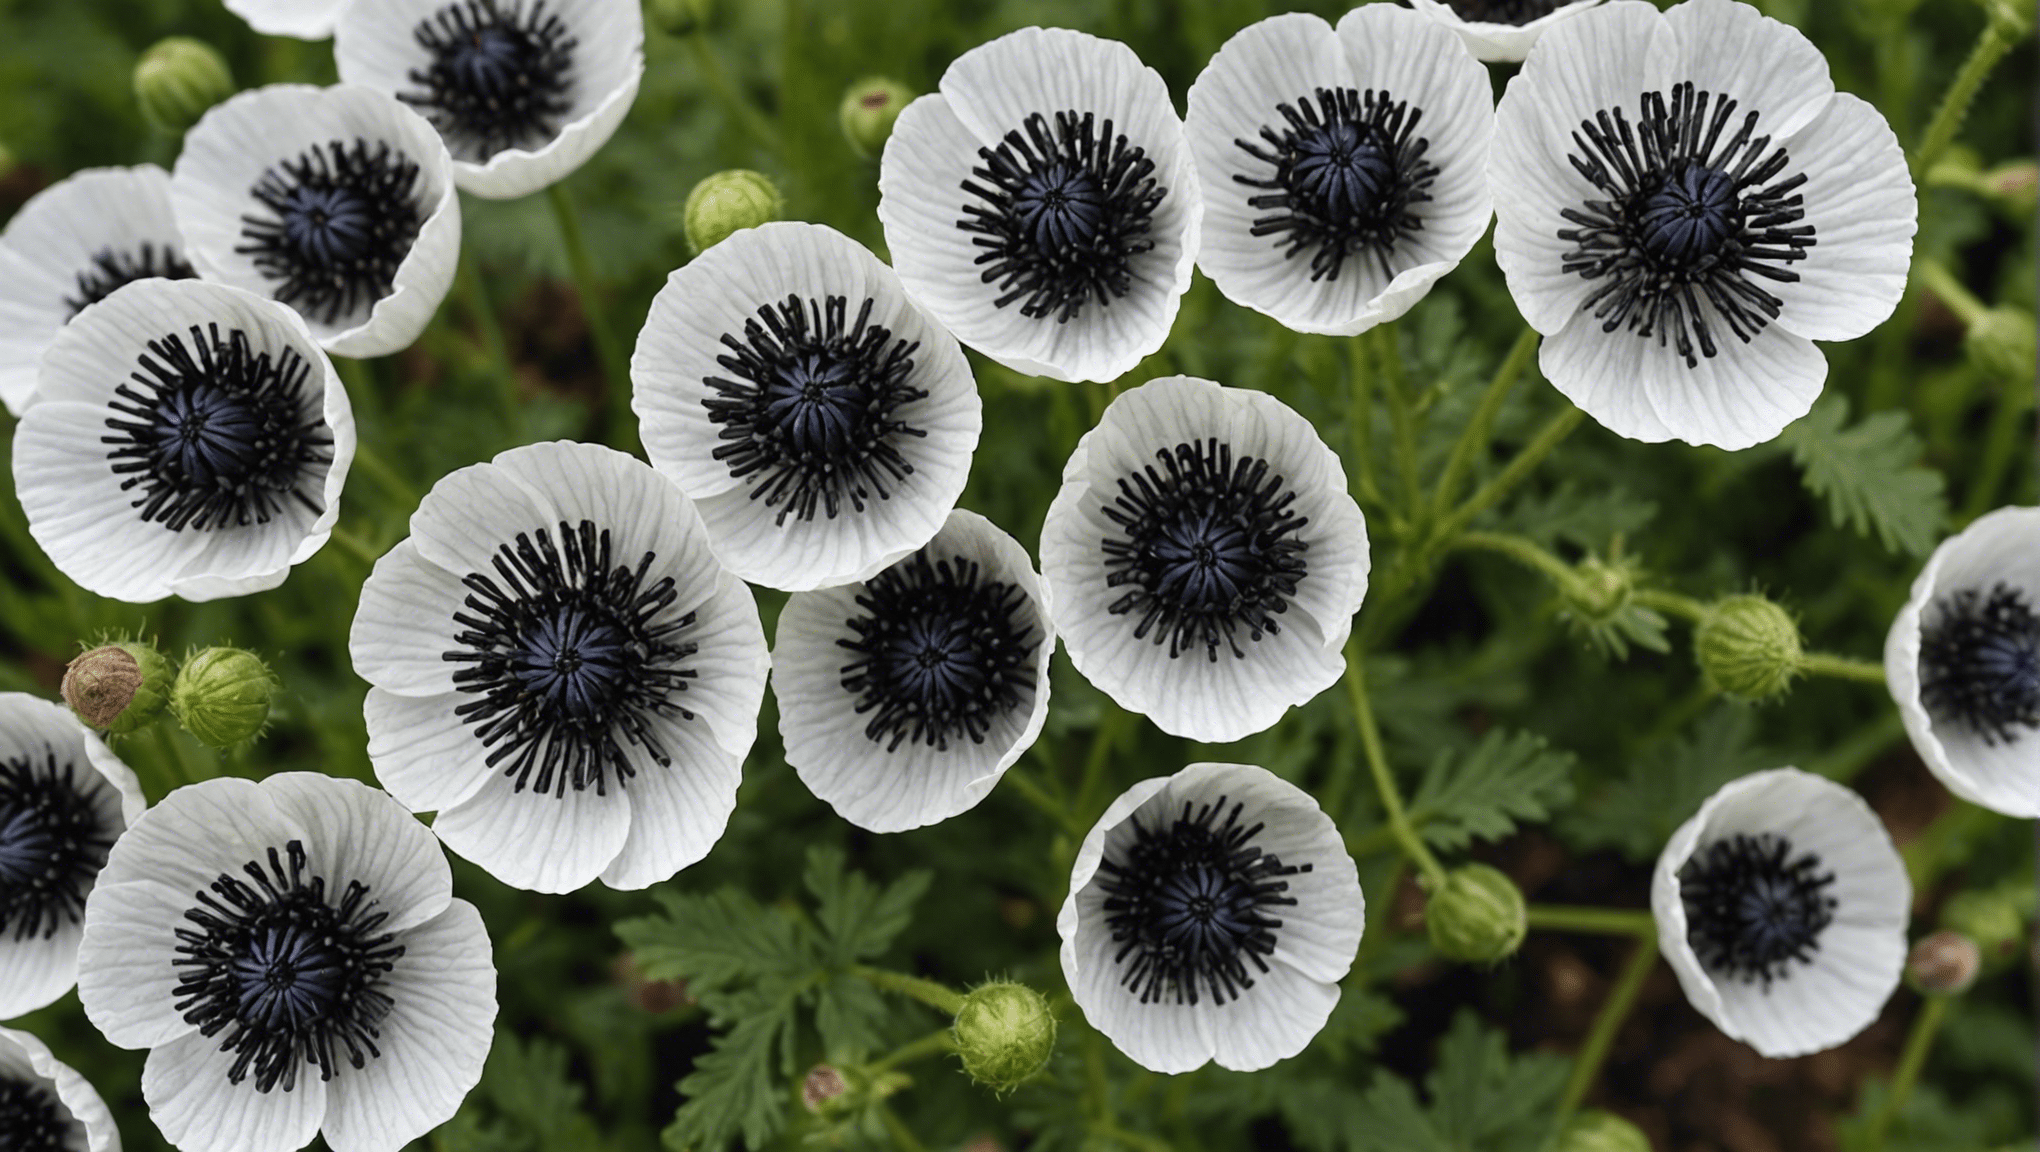 discover if tiny black bugs resembling poppy seeds are harmful in this comprehensive article.